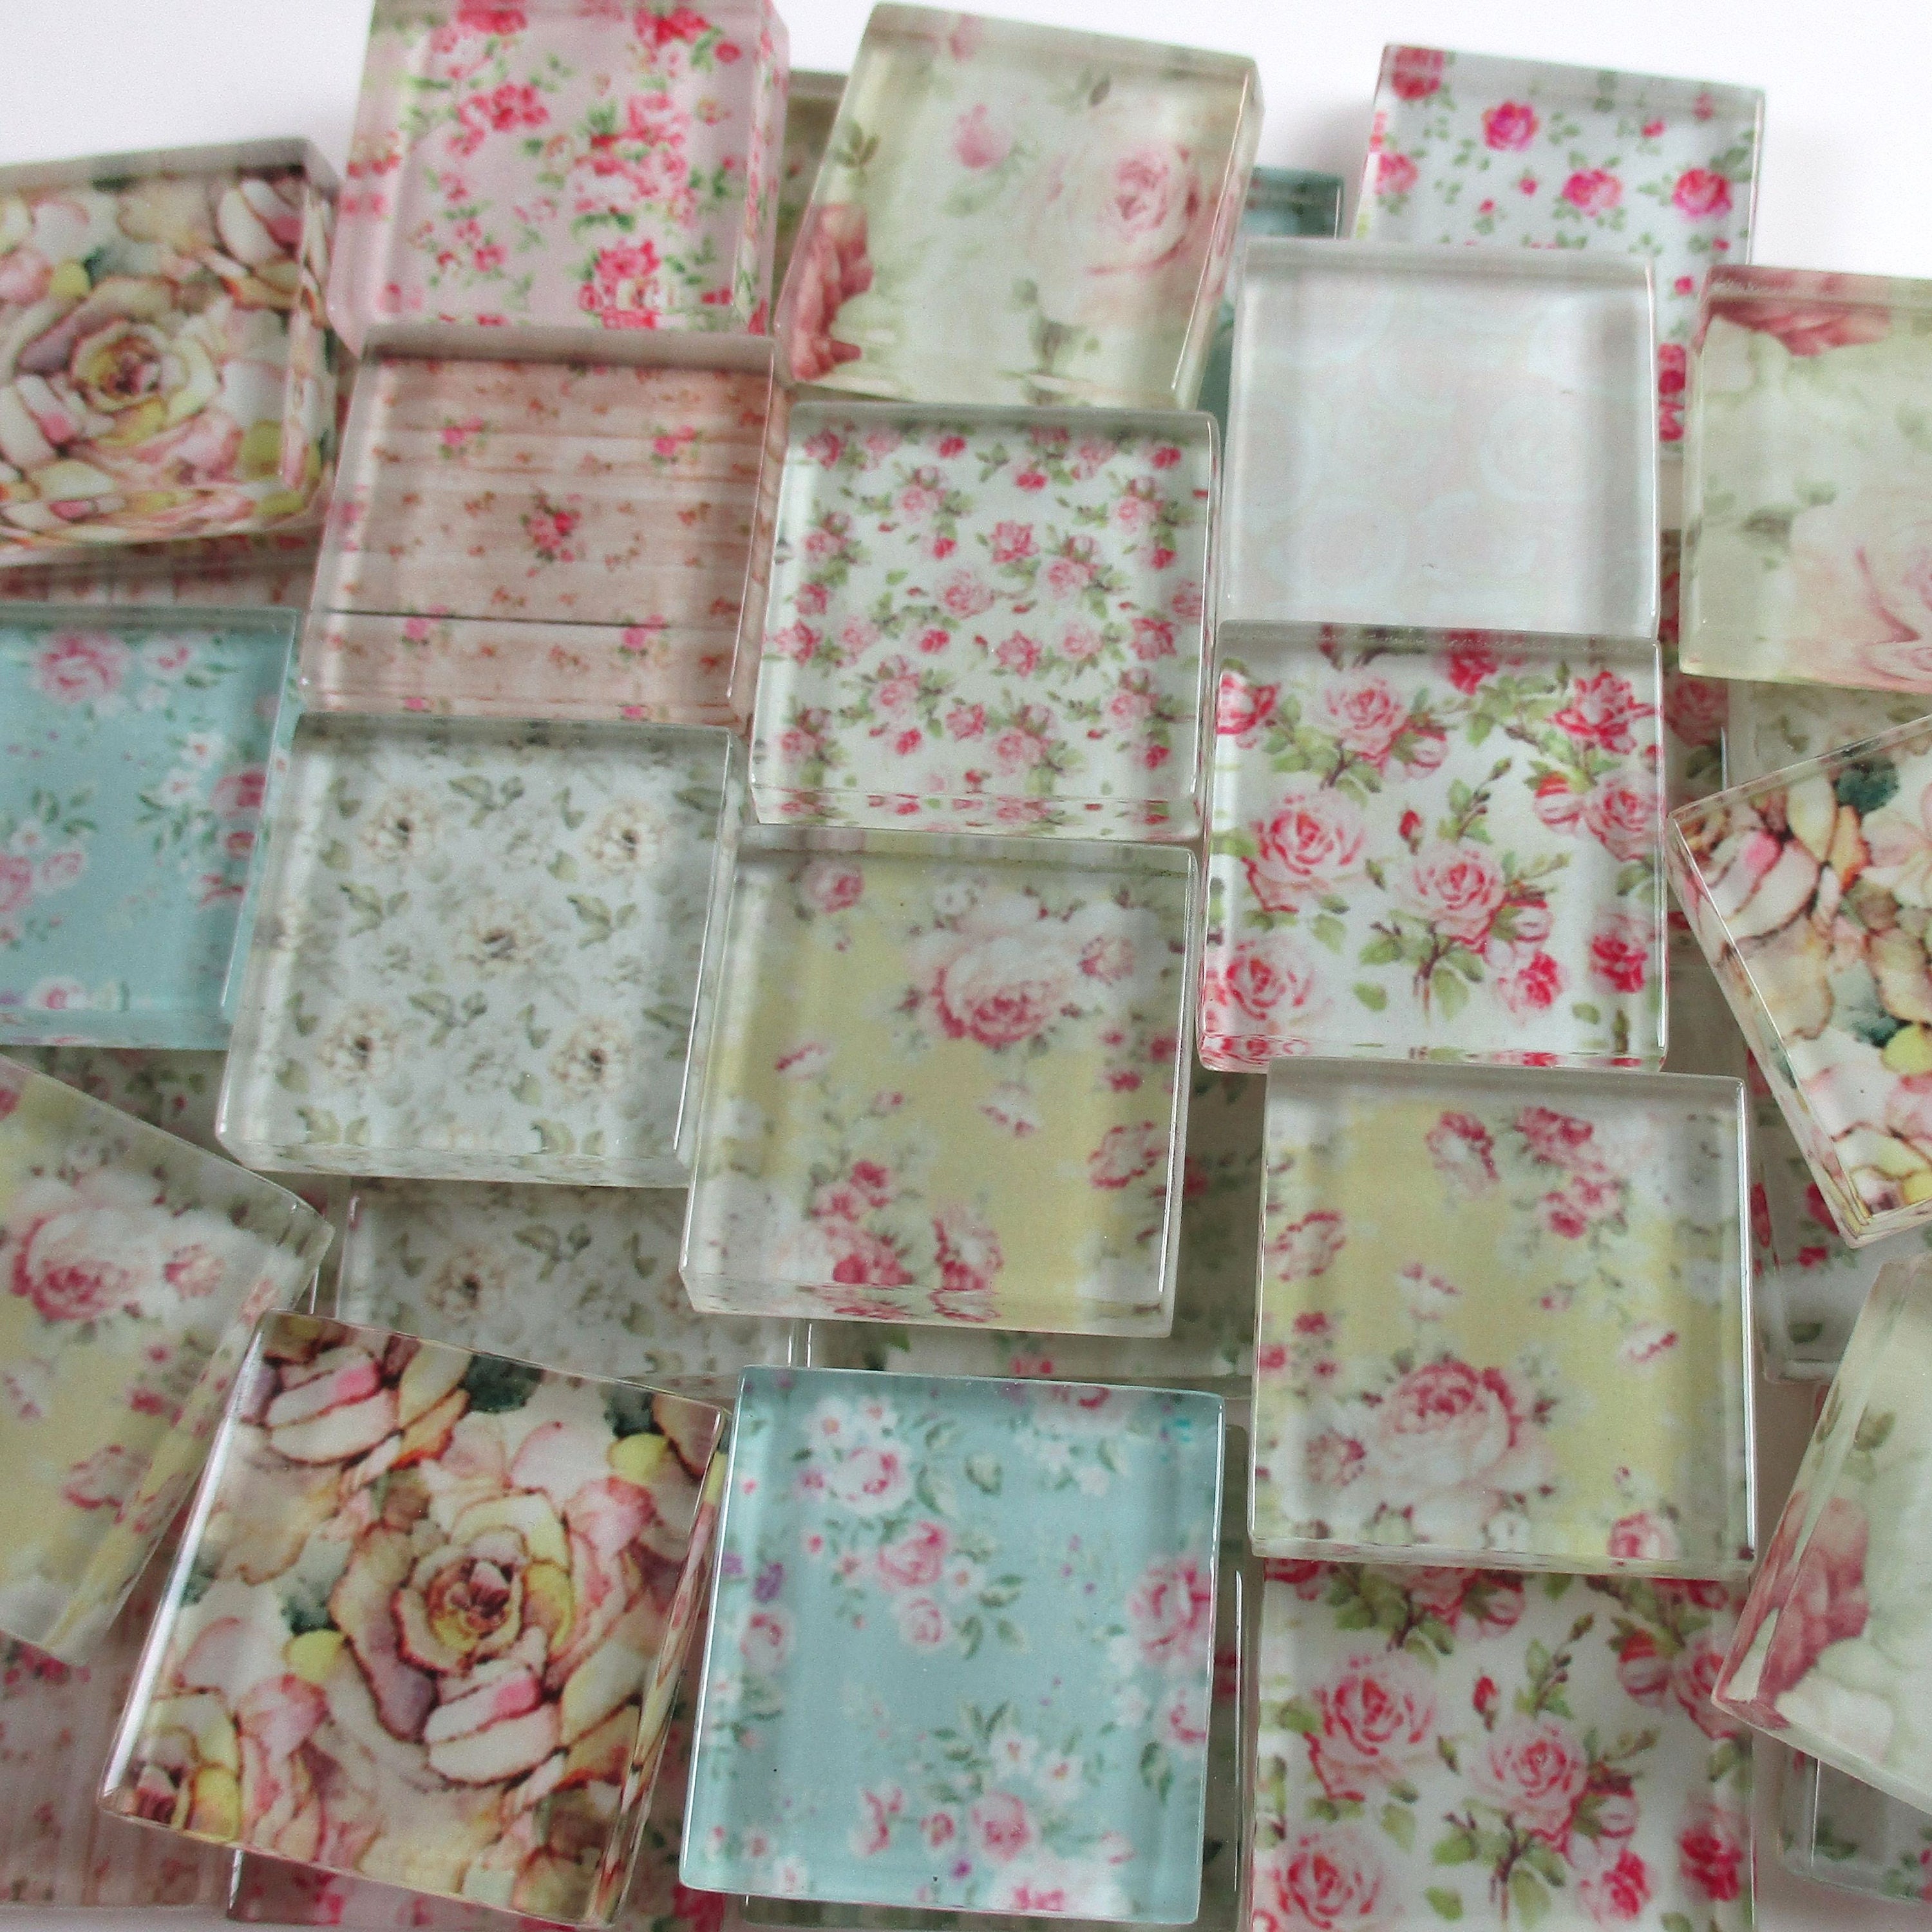 Glass Mosaic Tiles Shabby Chic Flowers Mixed Designs Roses - Etsy